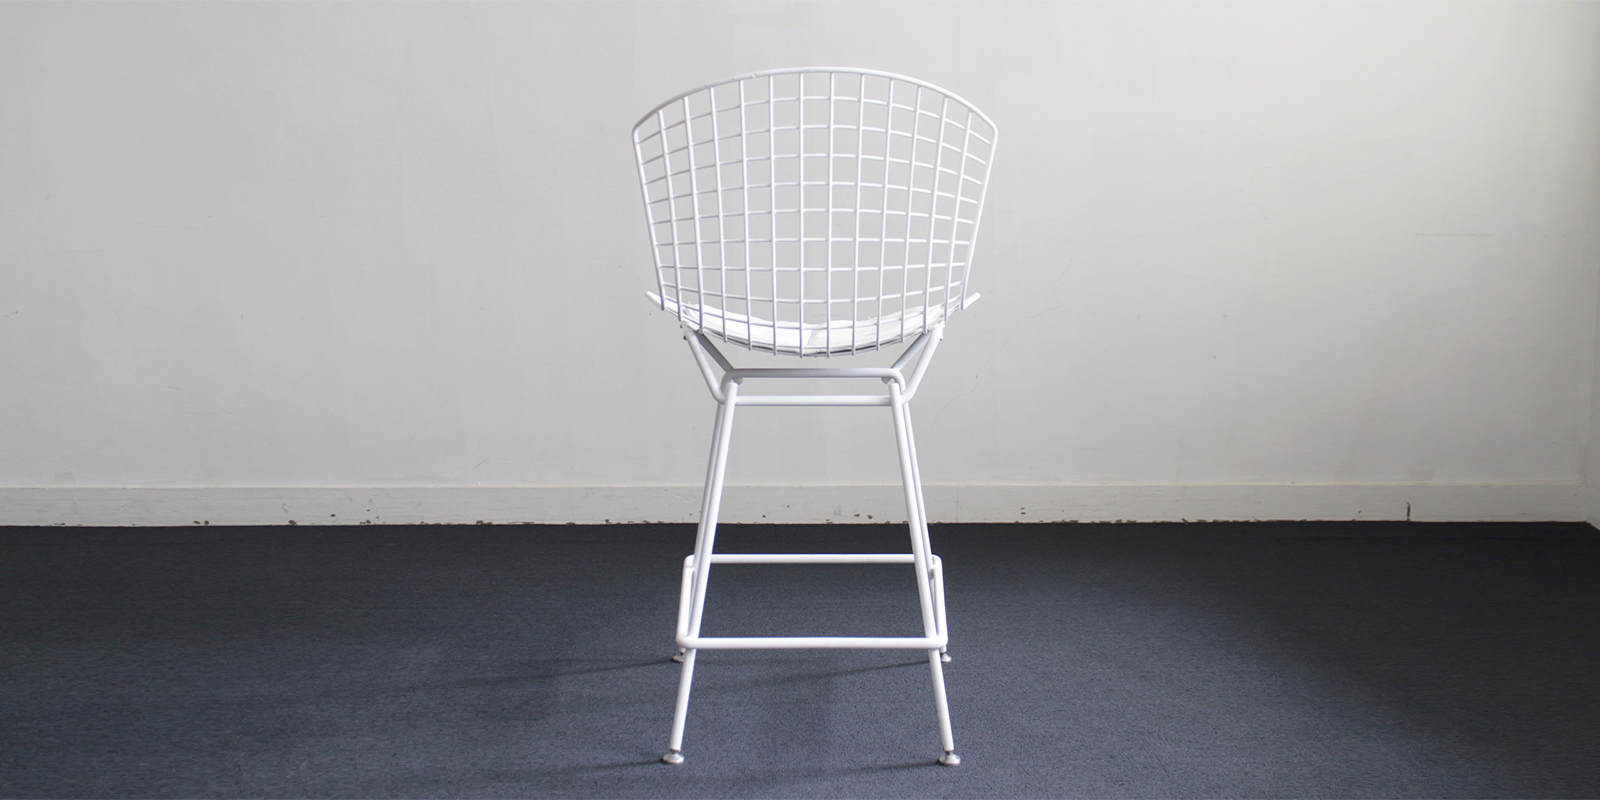 sold out】Knoll ワイヤーチェア（ハイタイプ）・ホワイト（USED） | DDEPARTMENT